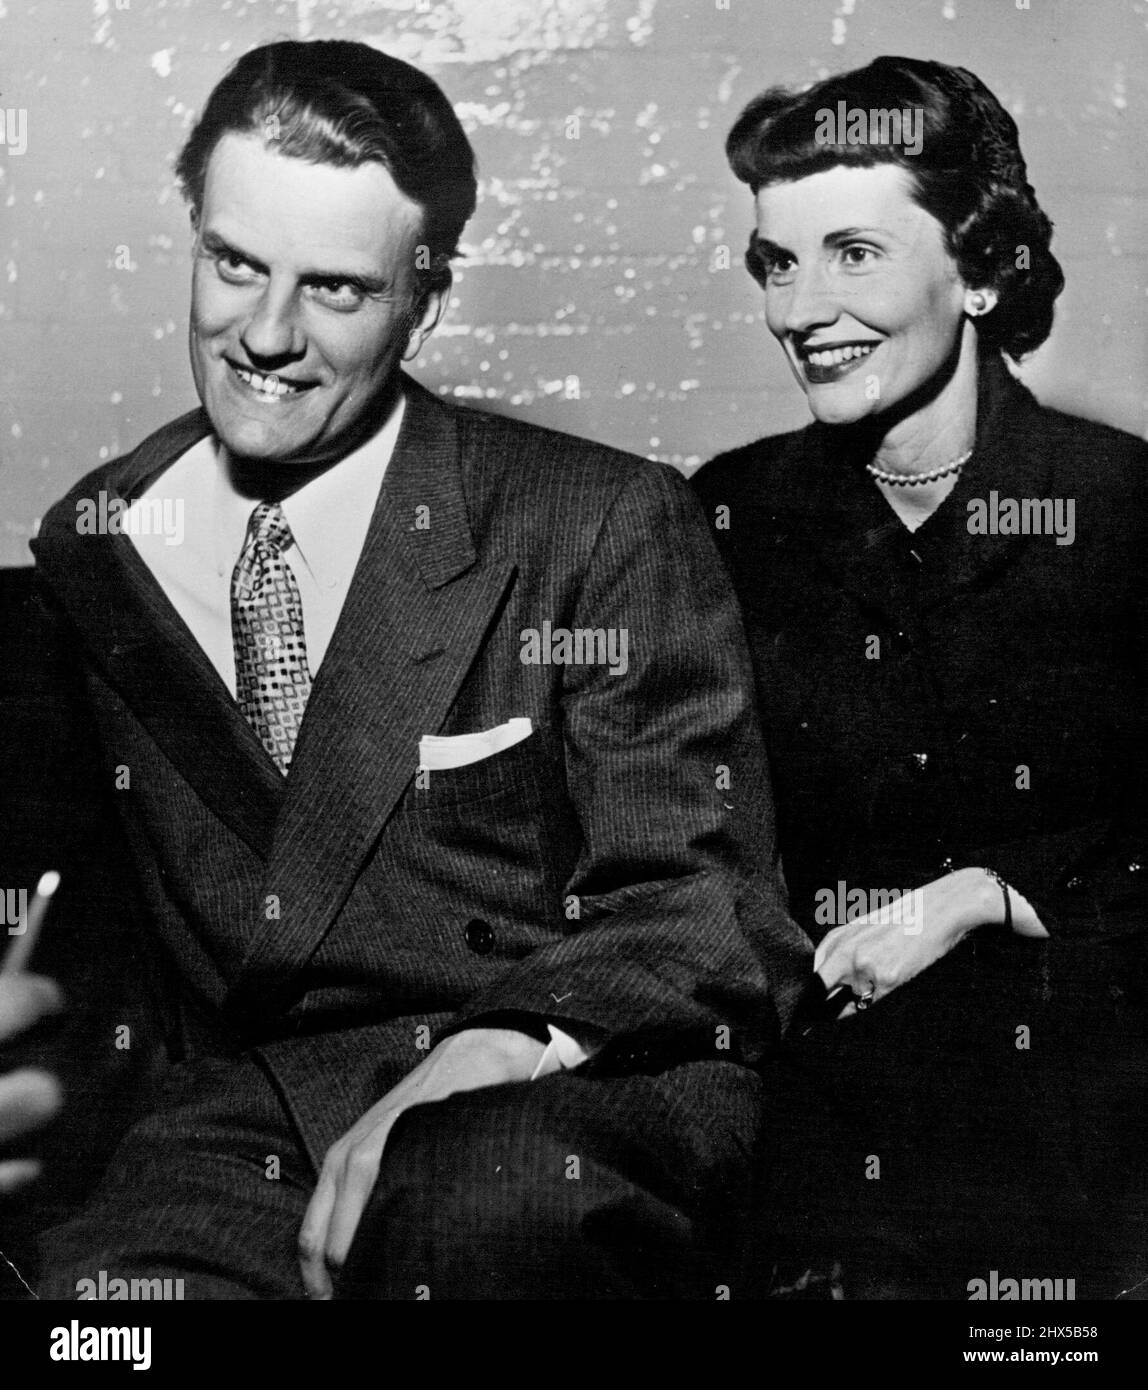 DR. And Mrs. Billy Graham -- The famous American Evangelist Photographed with his wife; before their Marriage, in 1943, She have three Daughters. November 30, 1954. (Photo by Max Elhert, Camera Press) Stock Photo